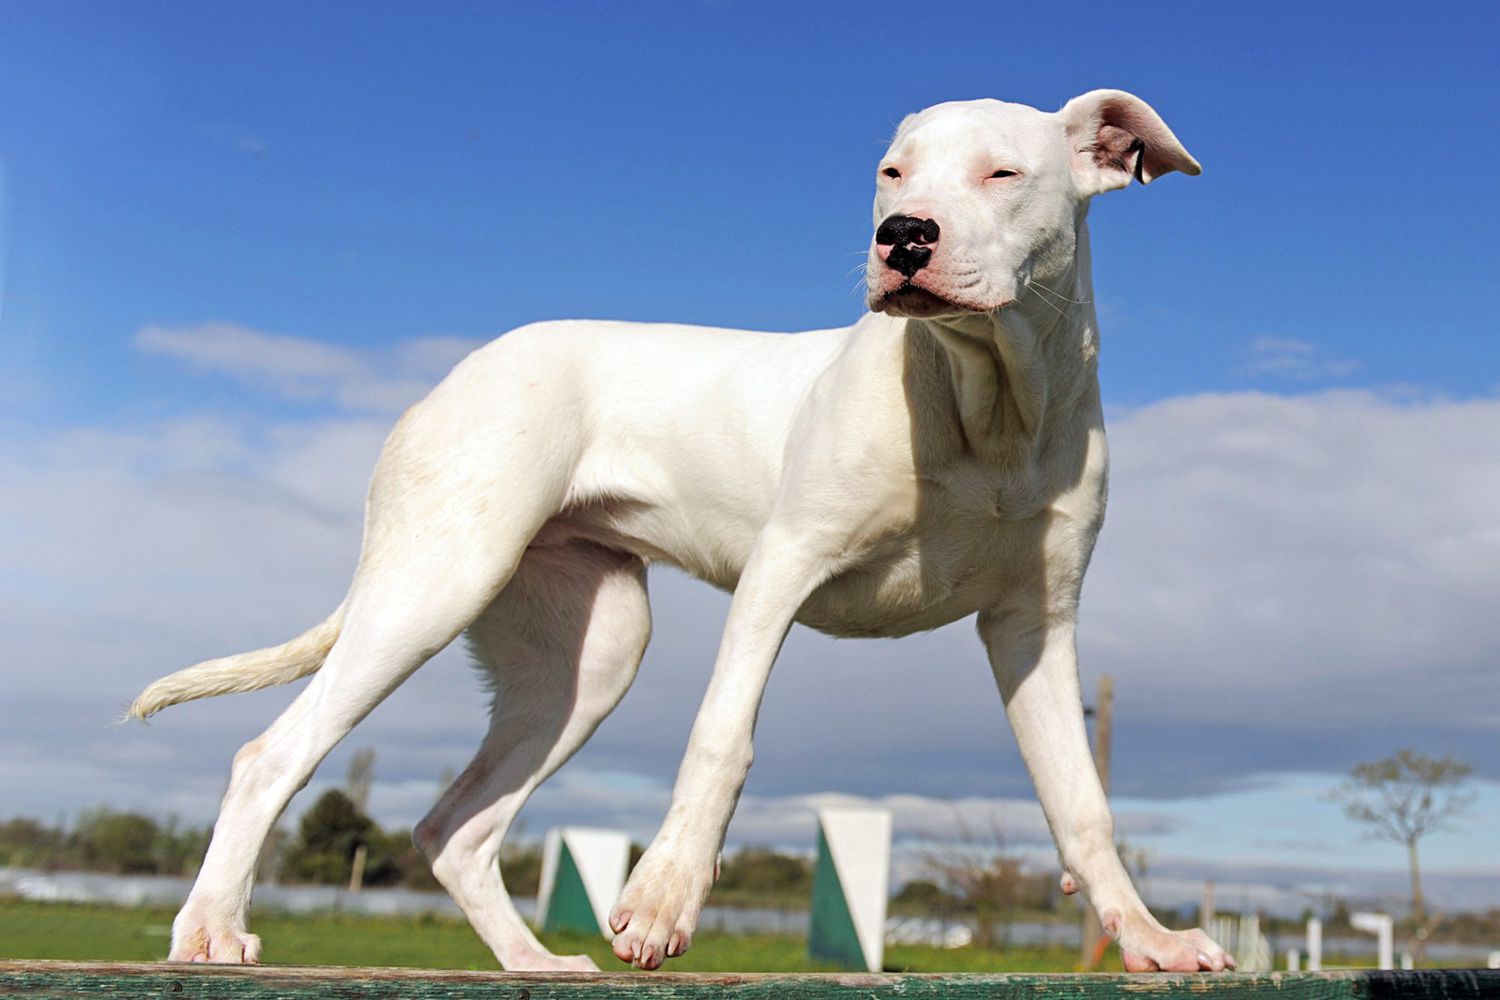 dogo argentino standing at a park in front of a blue sky